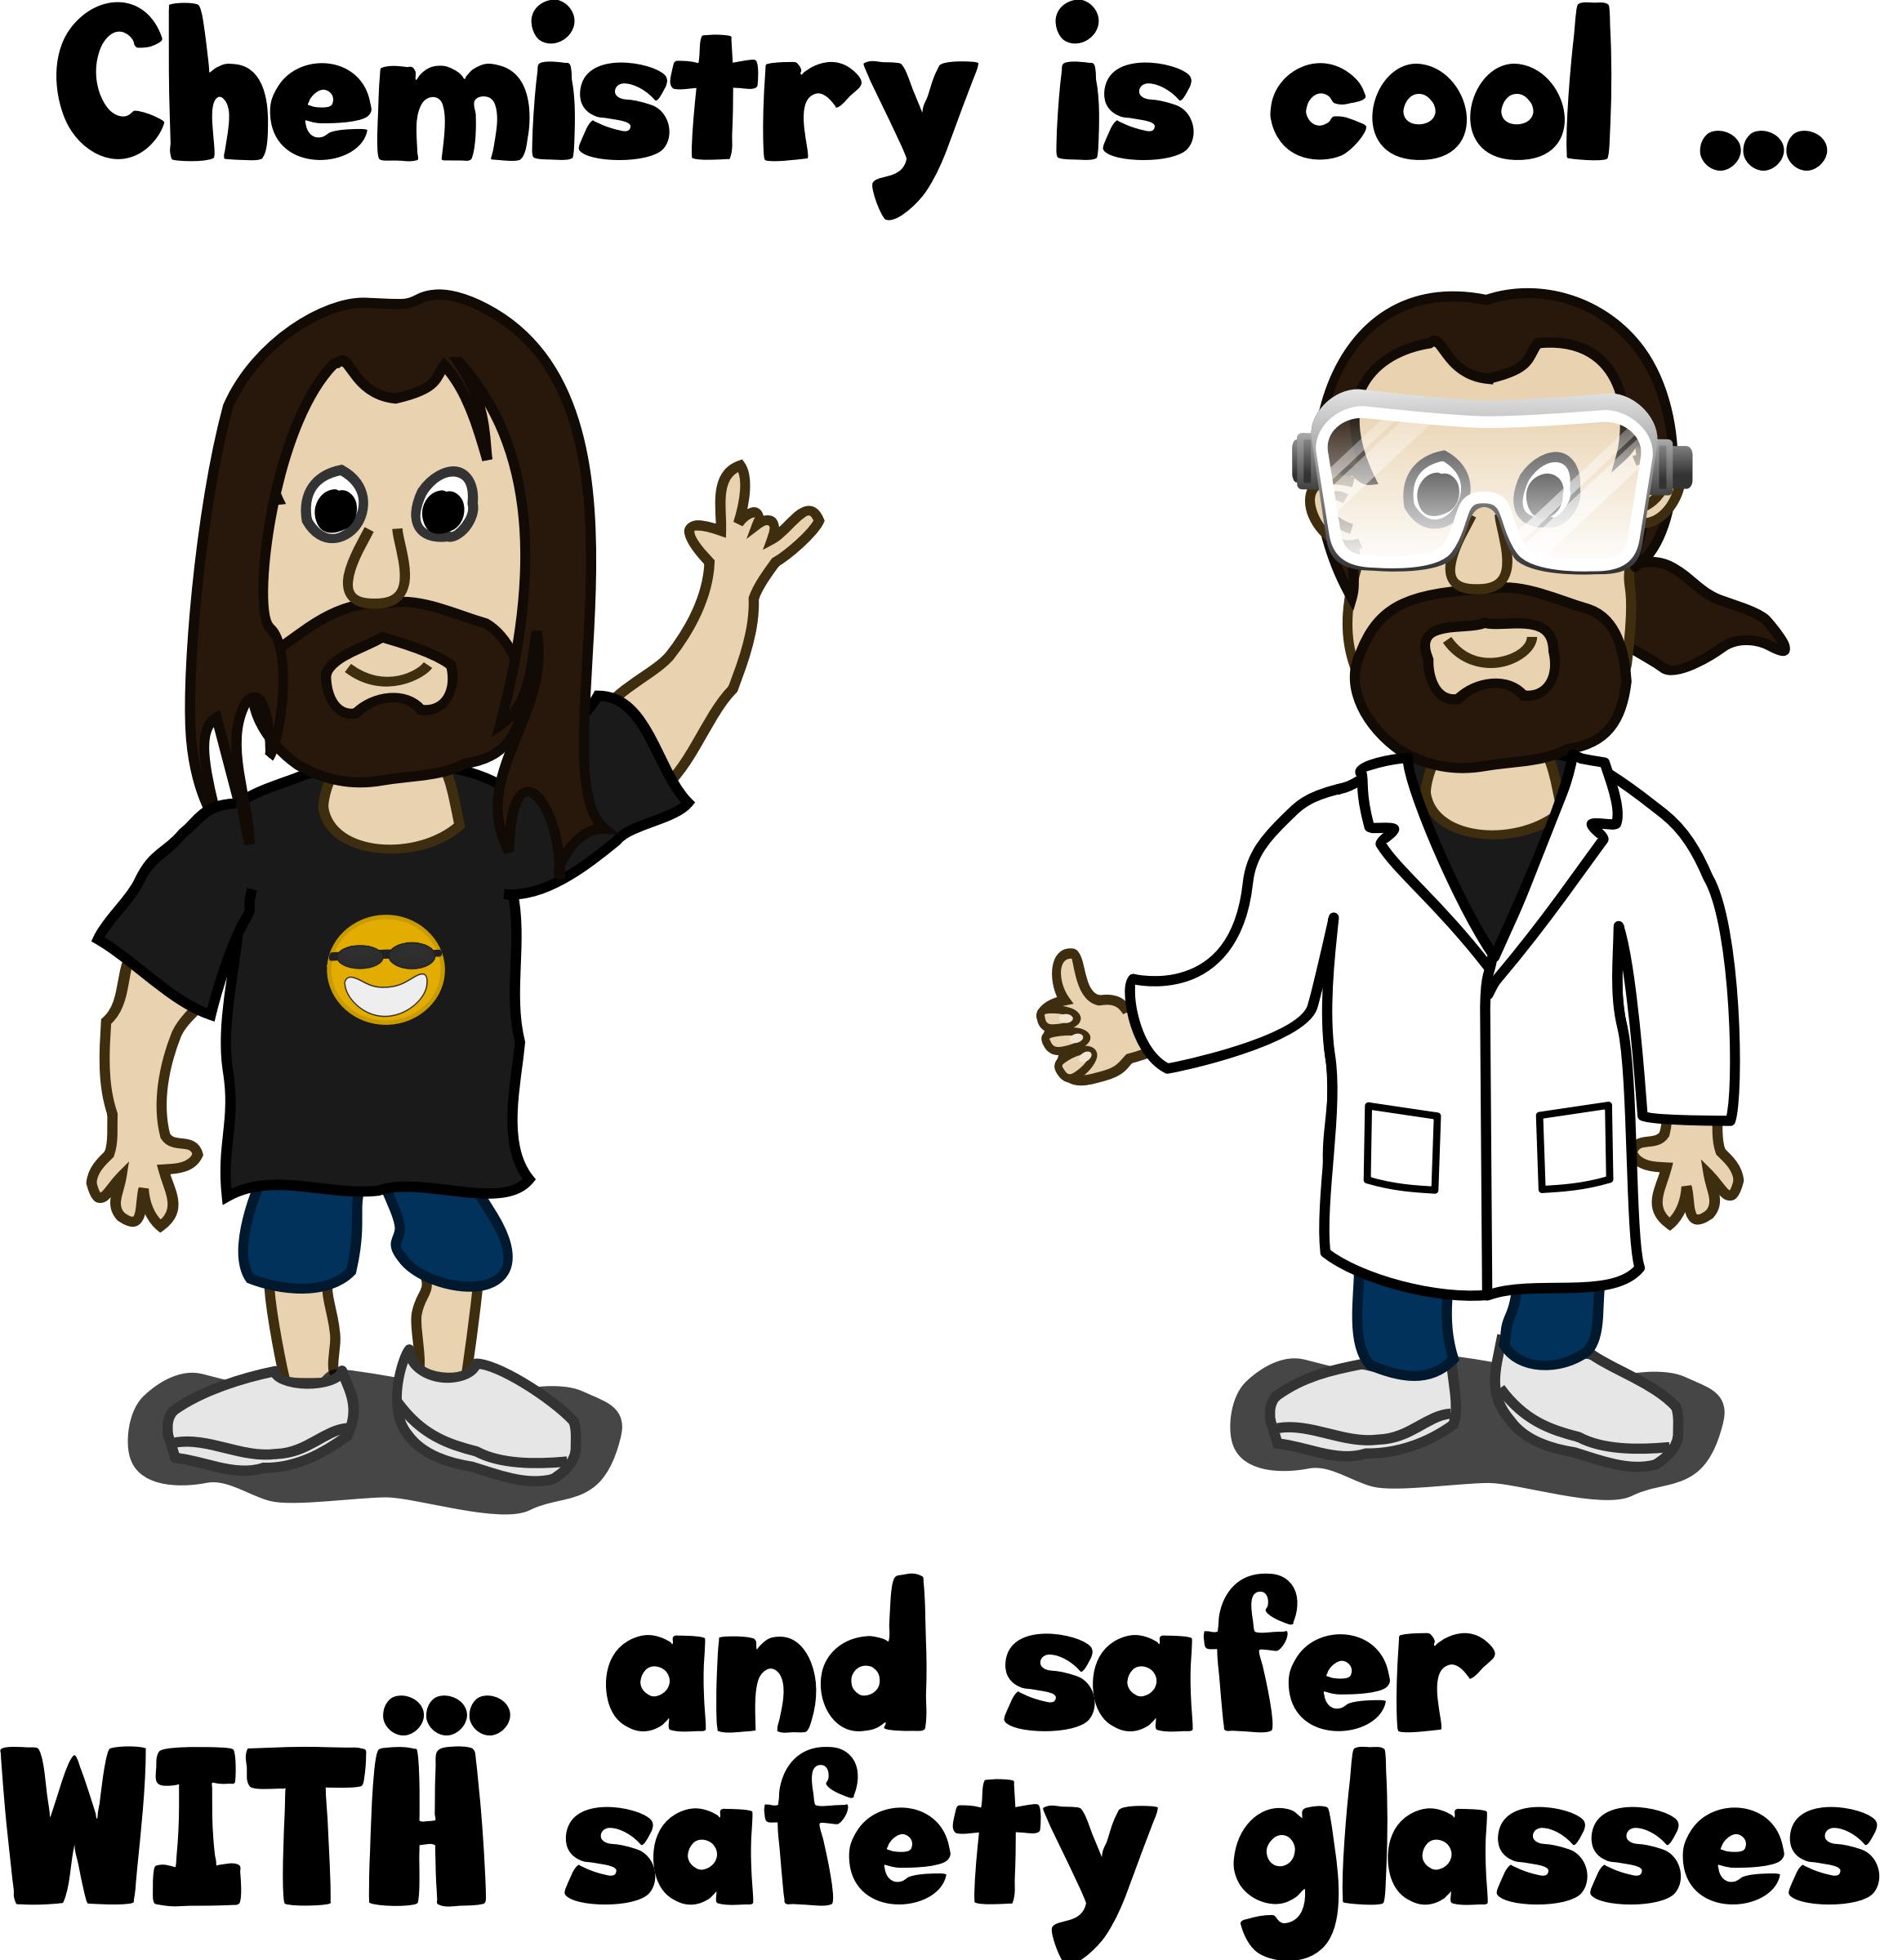 Chemistry is cool, by B. Lachner icons